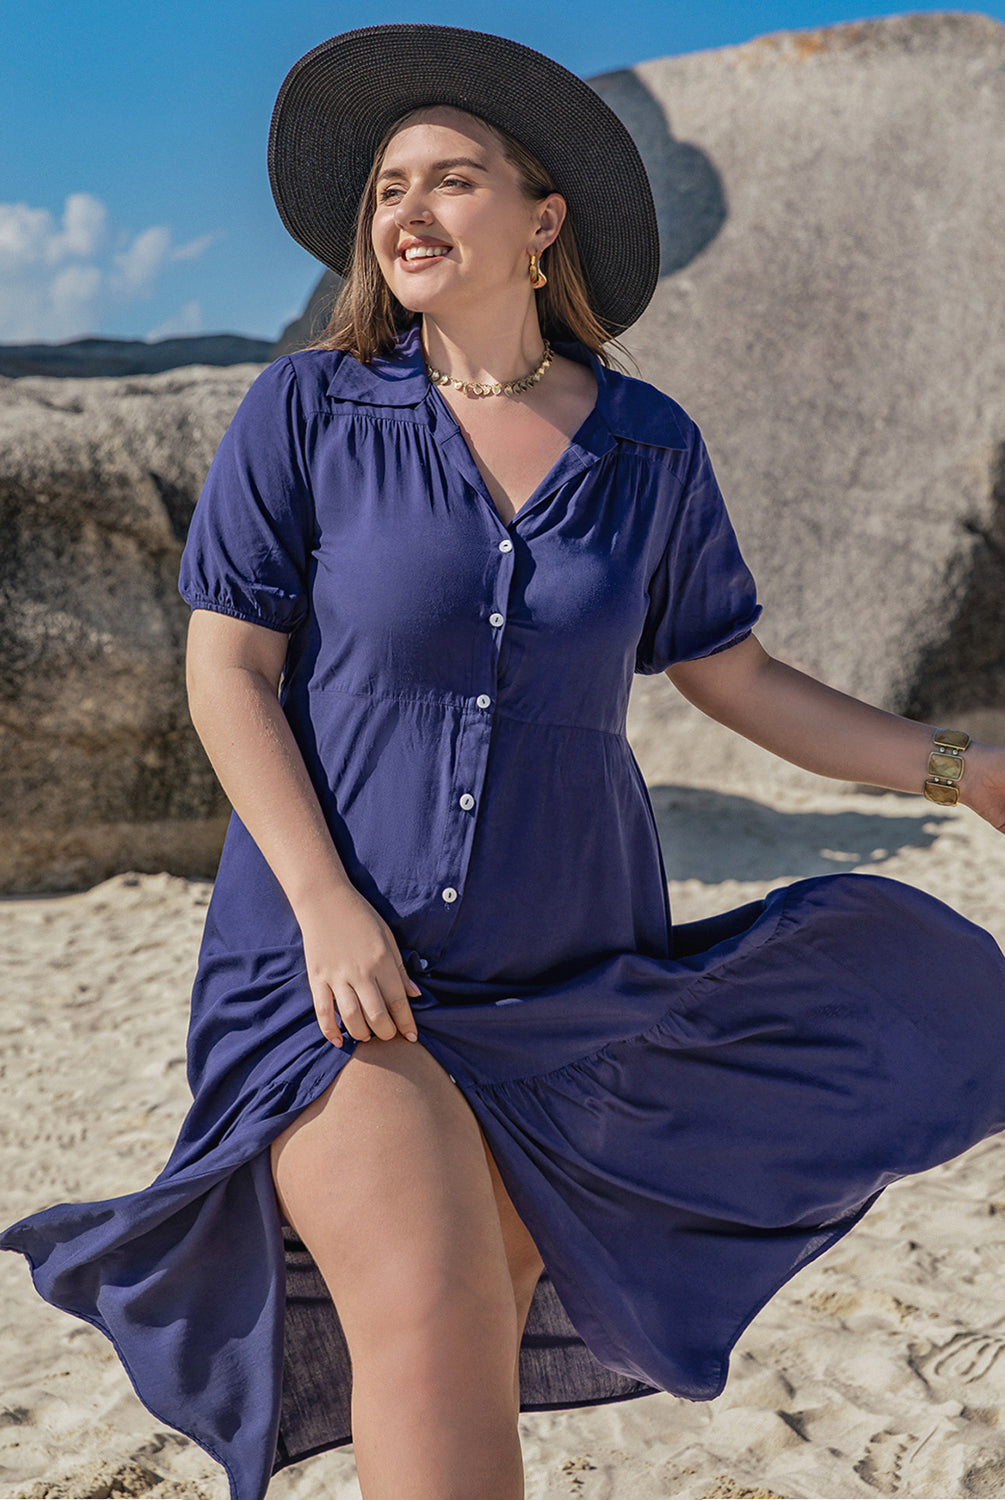 Woman wearing a plus size blue collared short sleeve midi dress, standing on a sandy beach with a large rock formation in the background.